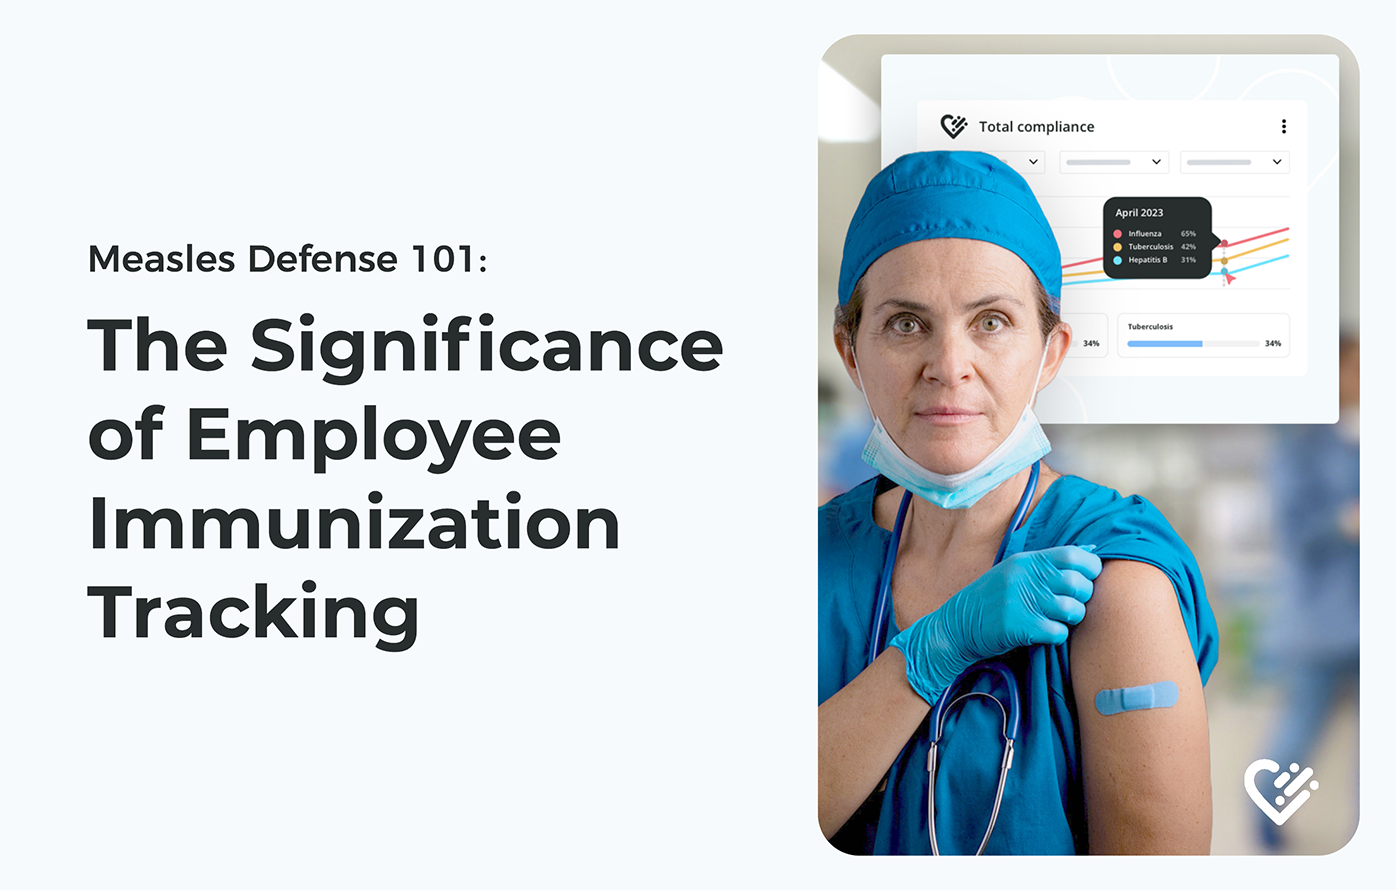 Measles Defense 101: The Significance of Employee Immunization Tracking